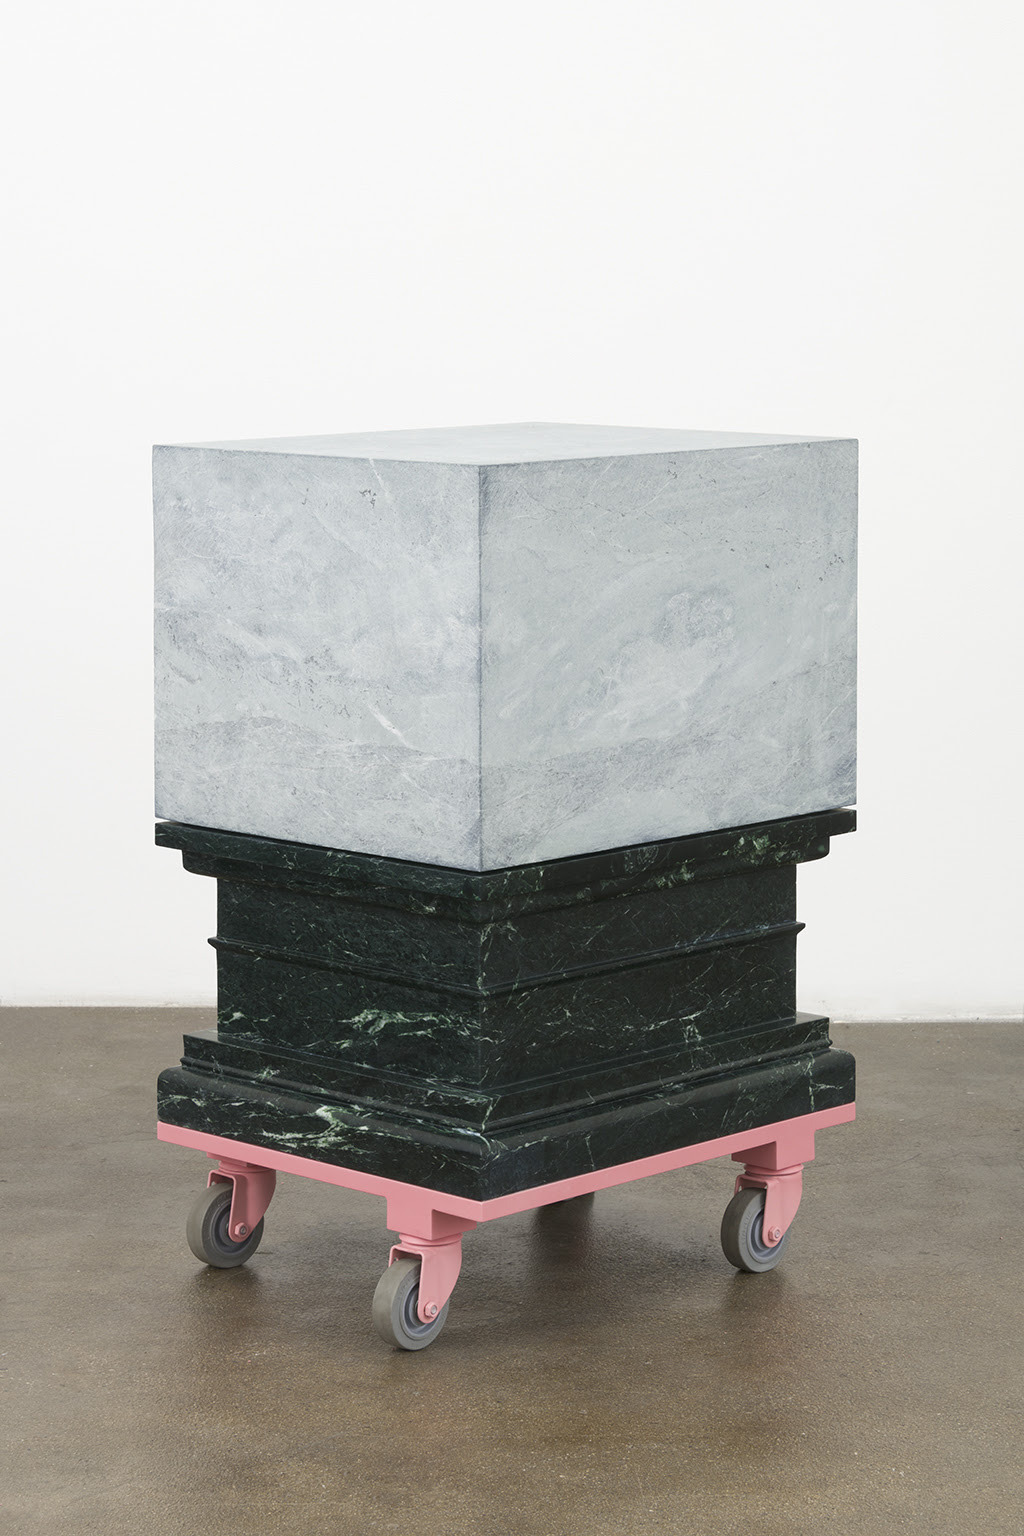 nicecollection:
“Shahryar Nashat - Mother on Wheels (Verde Antique), 2018, marble, powder-coated steel, castor wheels
”